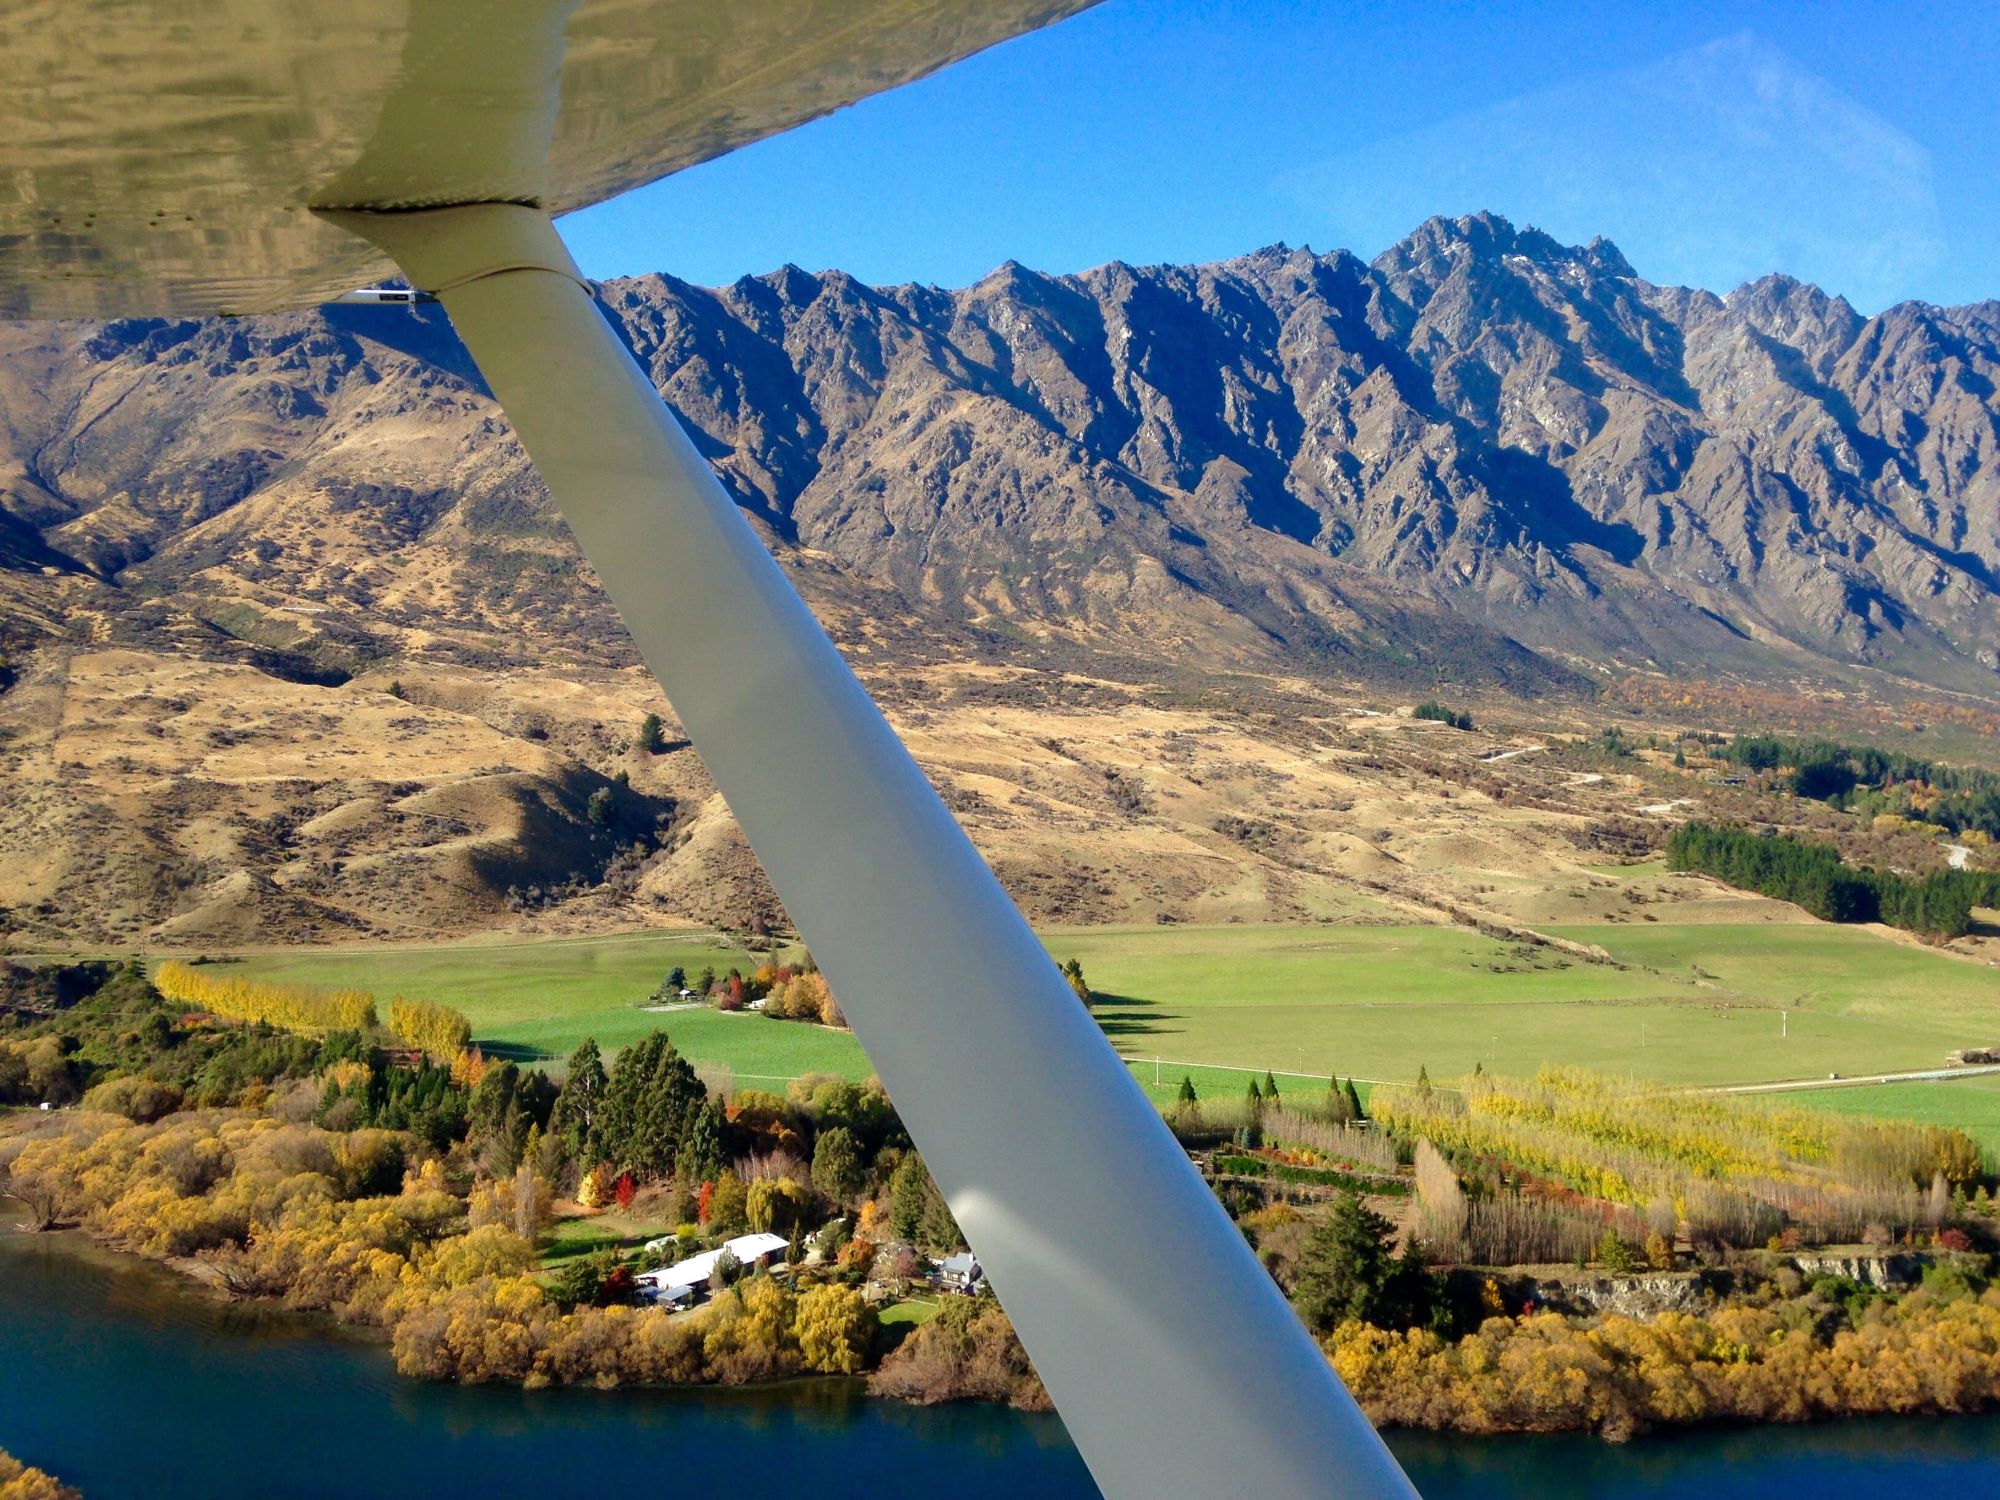 Flying by the Remarkables